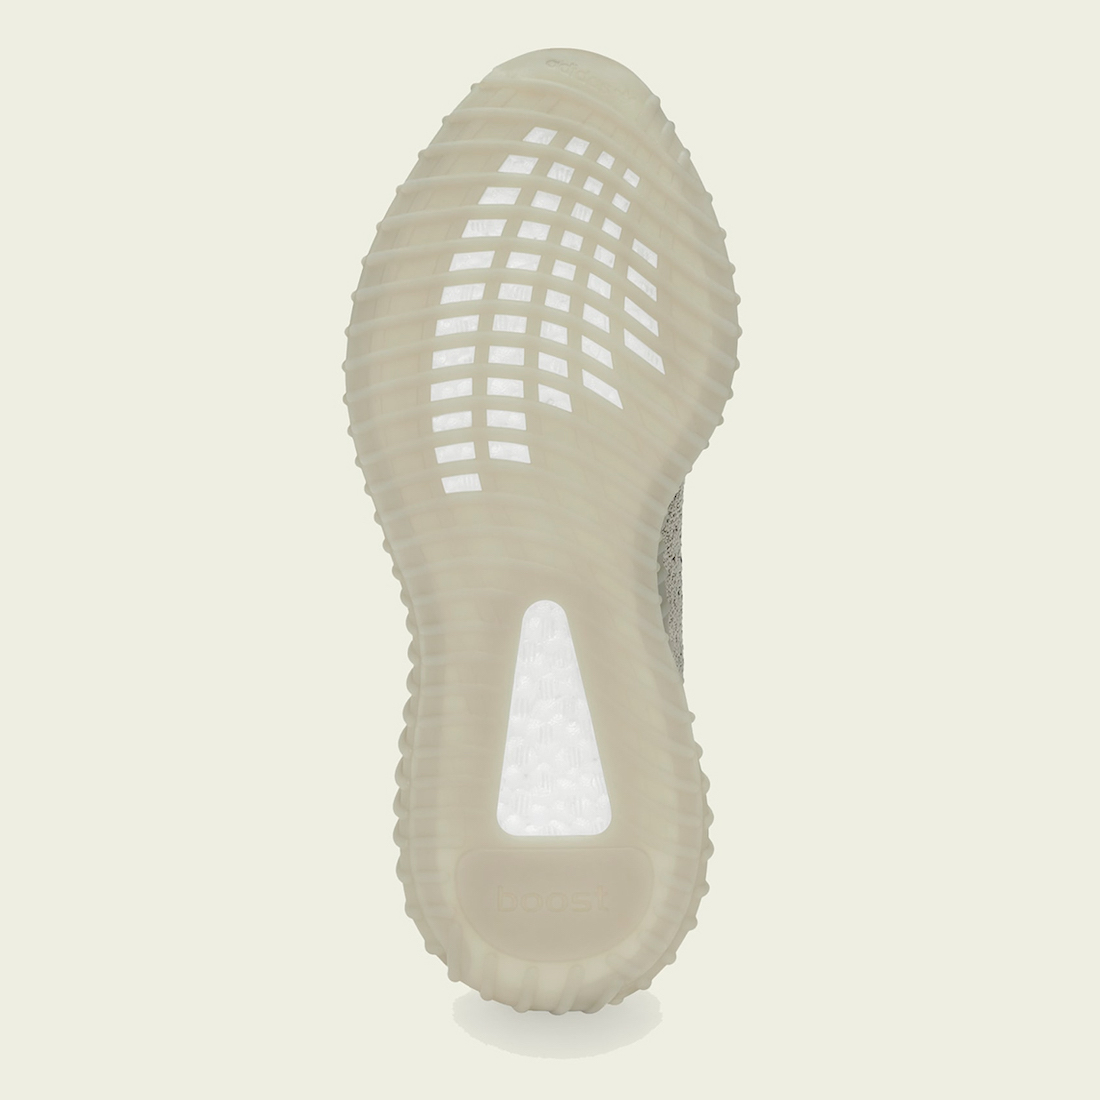 adidas Yeezy Boost 350 V2 HP7870 HP7870 Release Date + Where to Buy ...